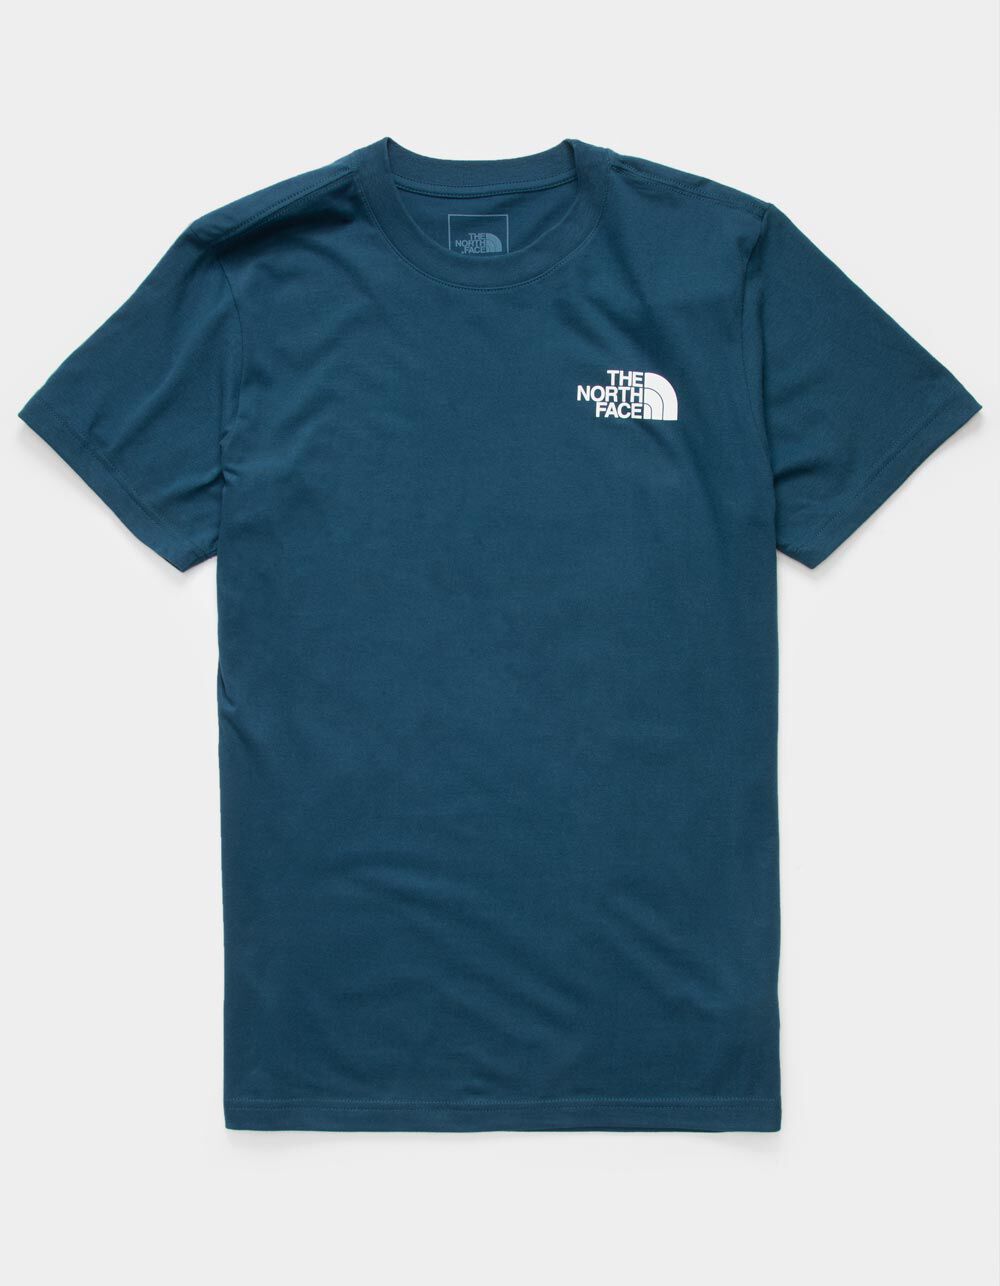 THE NORTH FACE Box NSE Olive Ink Mens T-Shirt - DARK BLUE | Tillys